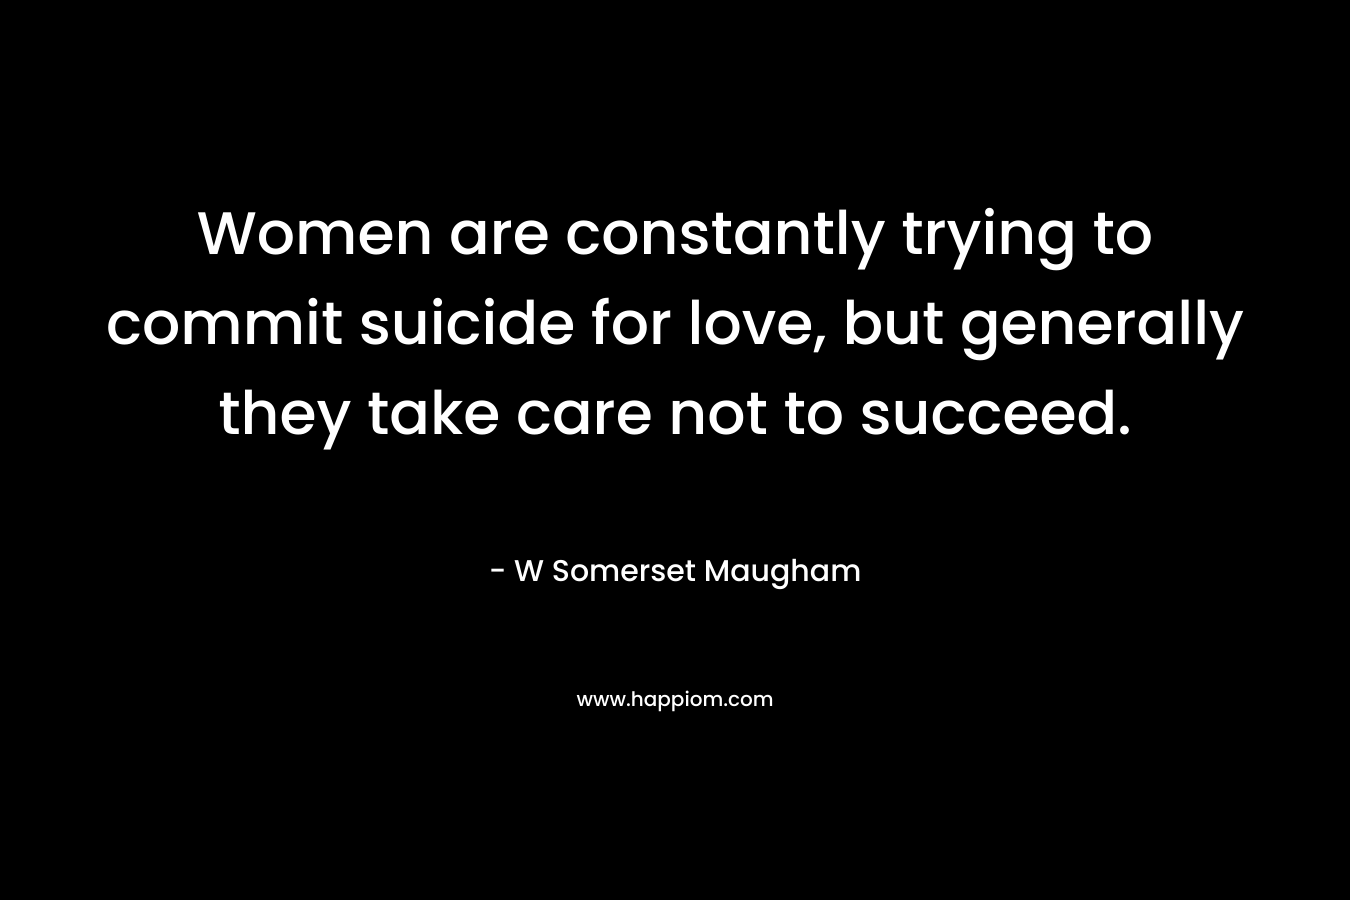 Women are constantly trying to commit suicide for love, but generally they take care not to succeed.